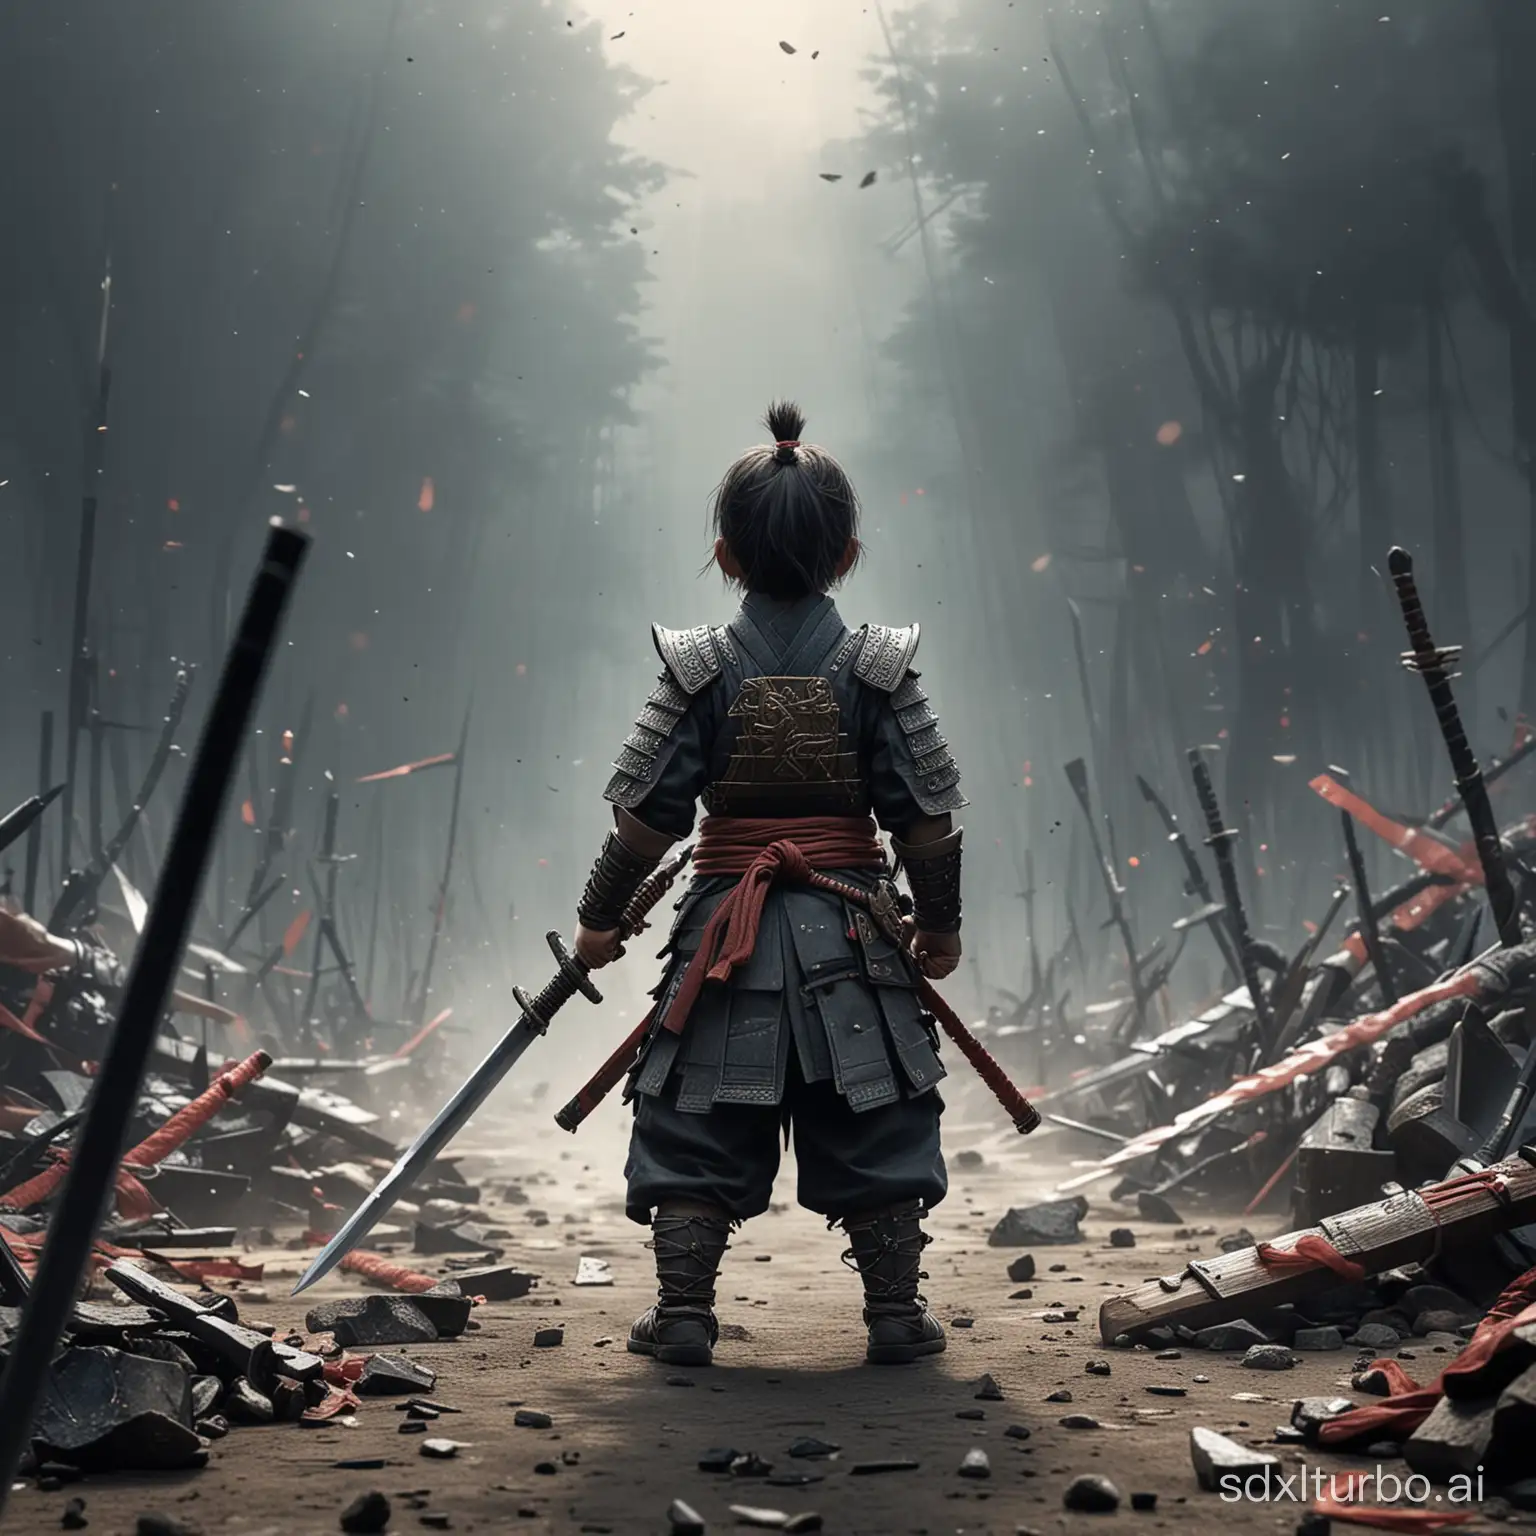 Little child samurai warrior, his grip on the sword unwavering as he stands amidst the chaos of battle, game character, stands at full height